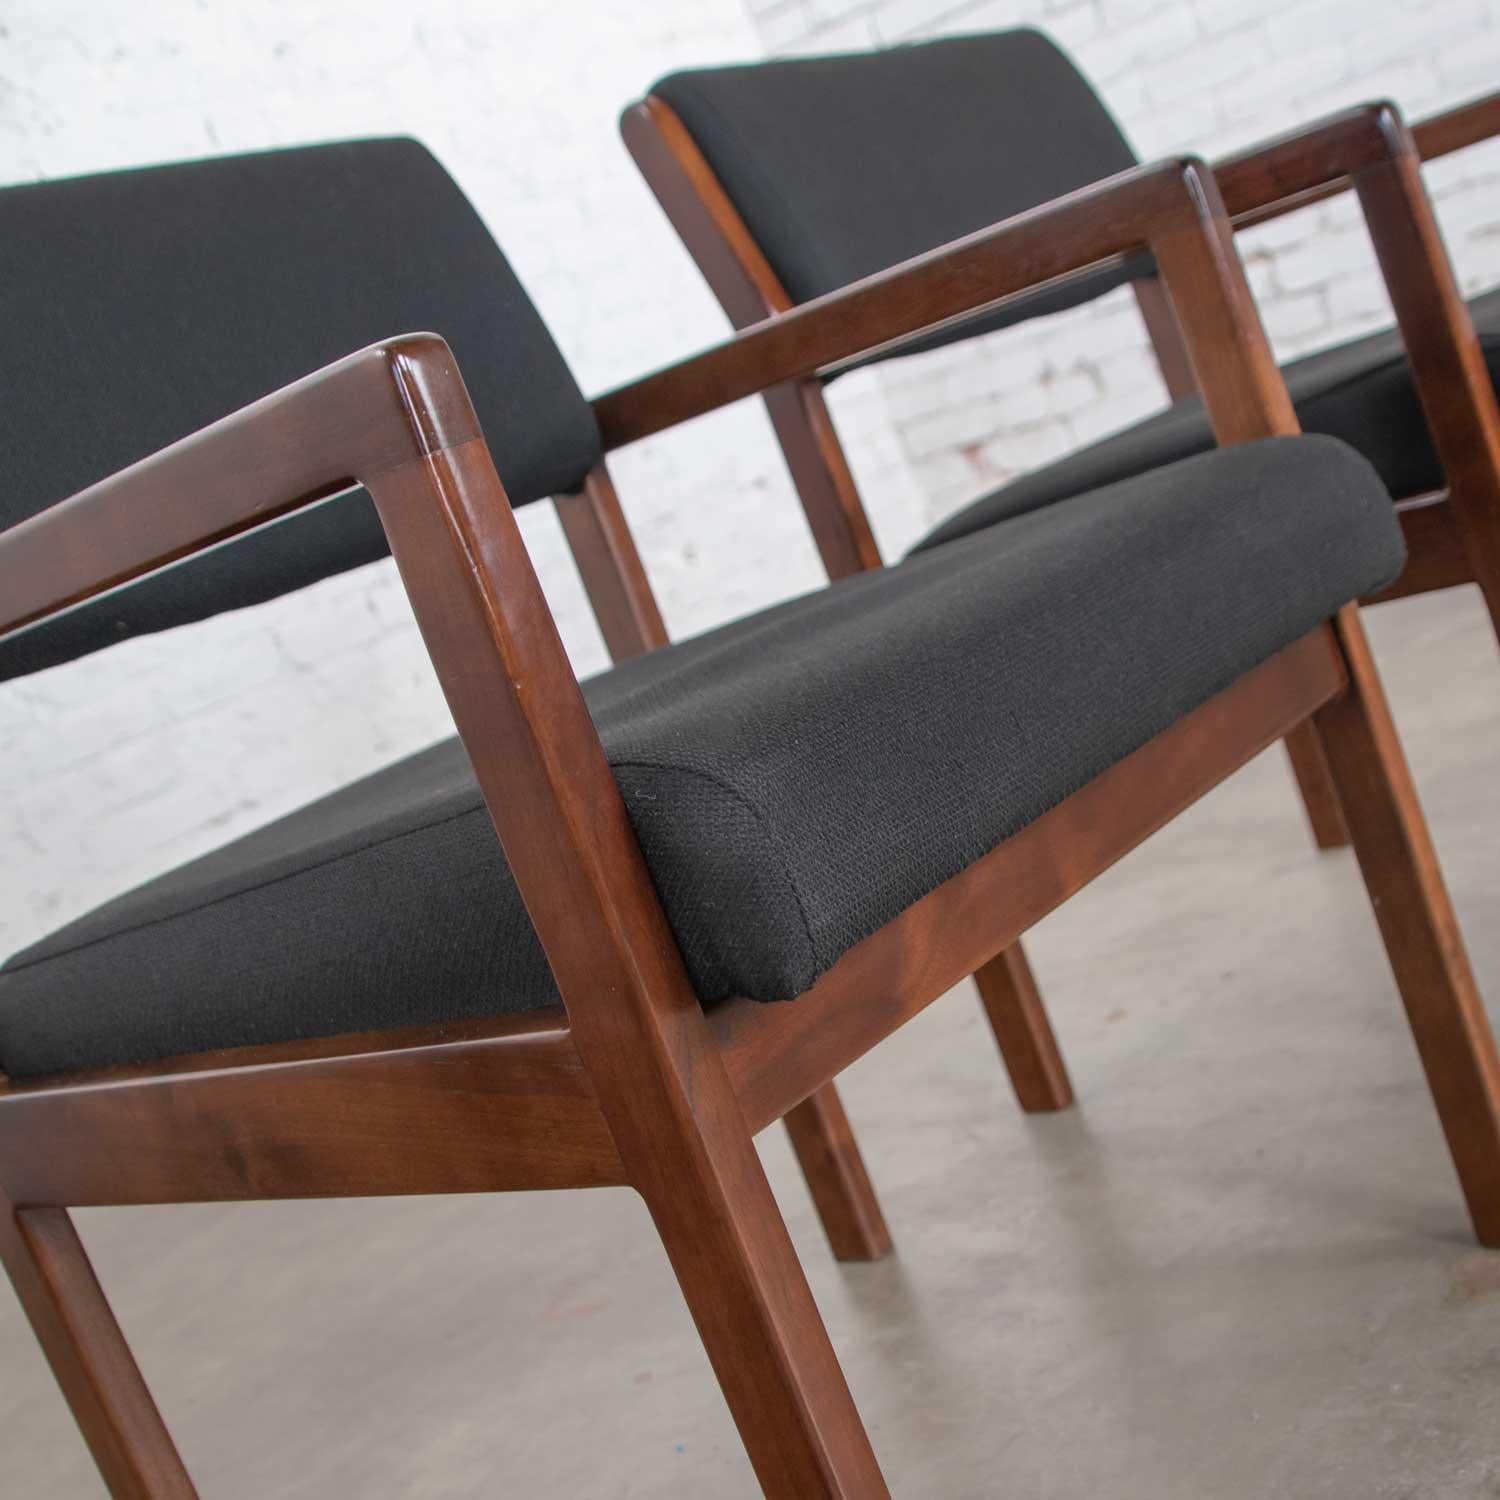 Modern Pair of Black and Walnut Tone Wood Accent or Dining Armchairs by Haworth For Sale 2